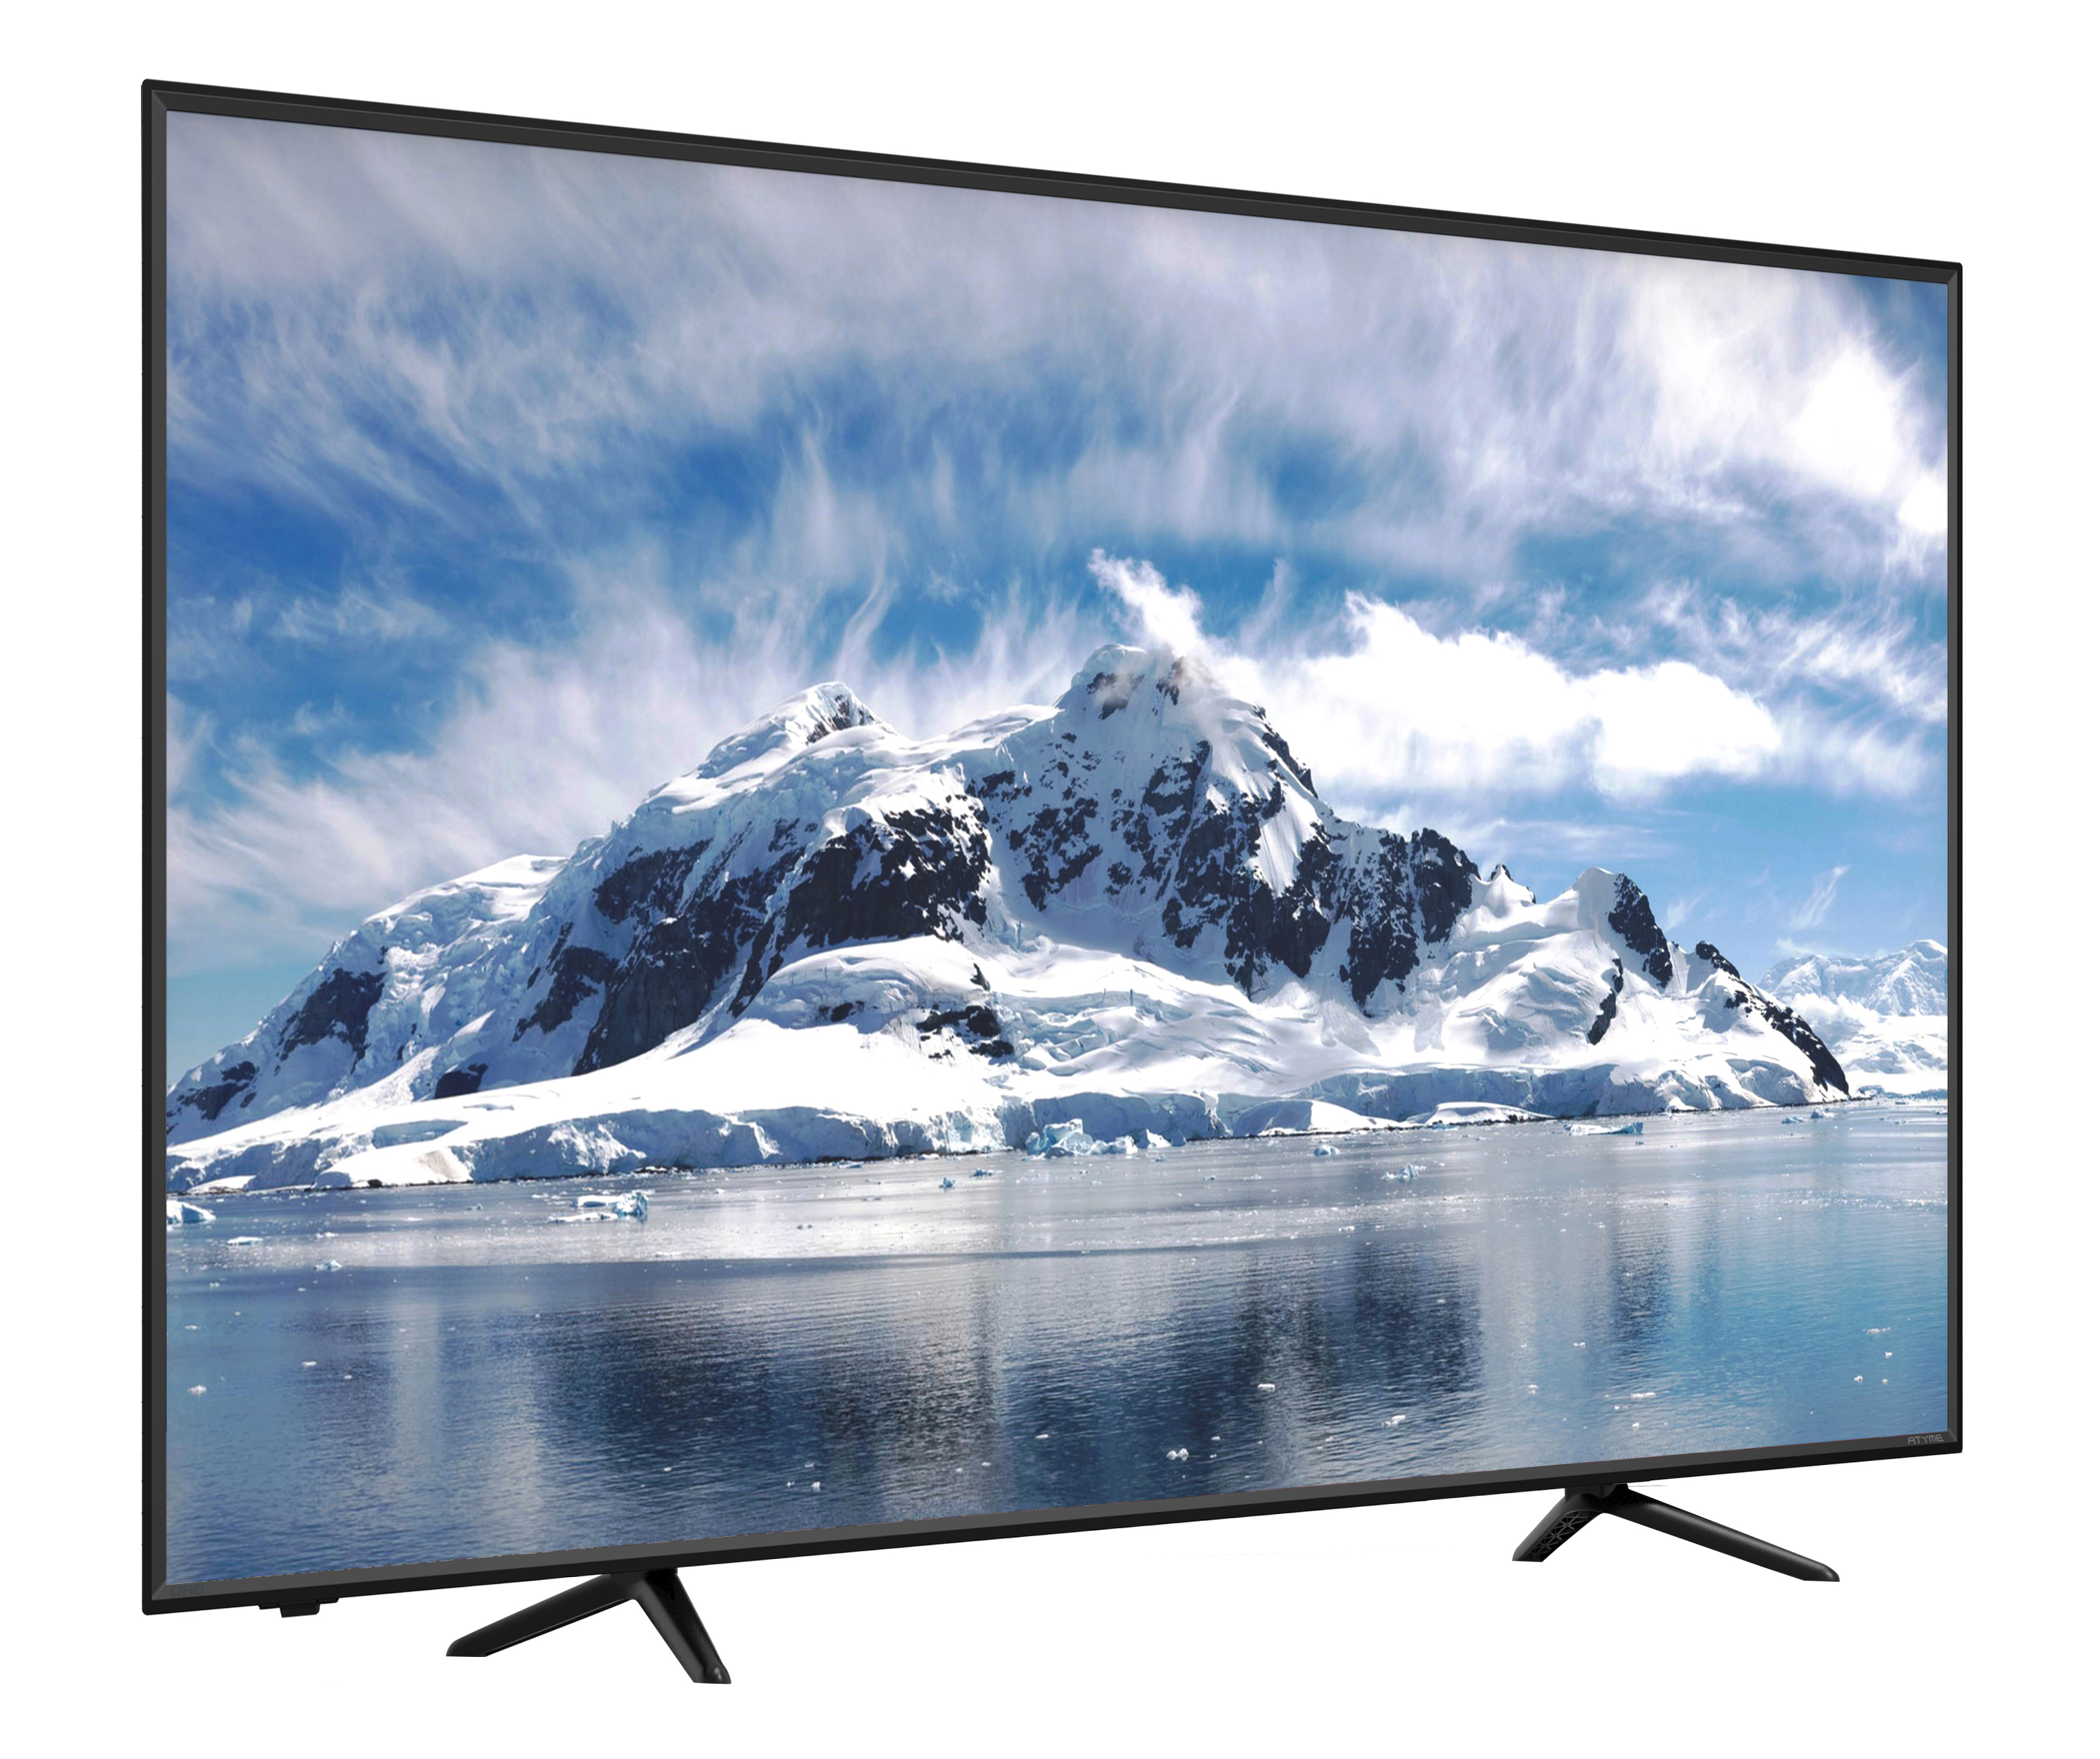 ATYME 65" Class 4K (2160P) LED TV (650AM7UD) - image 3 of 18